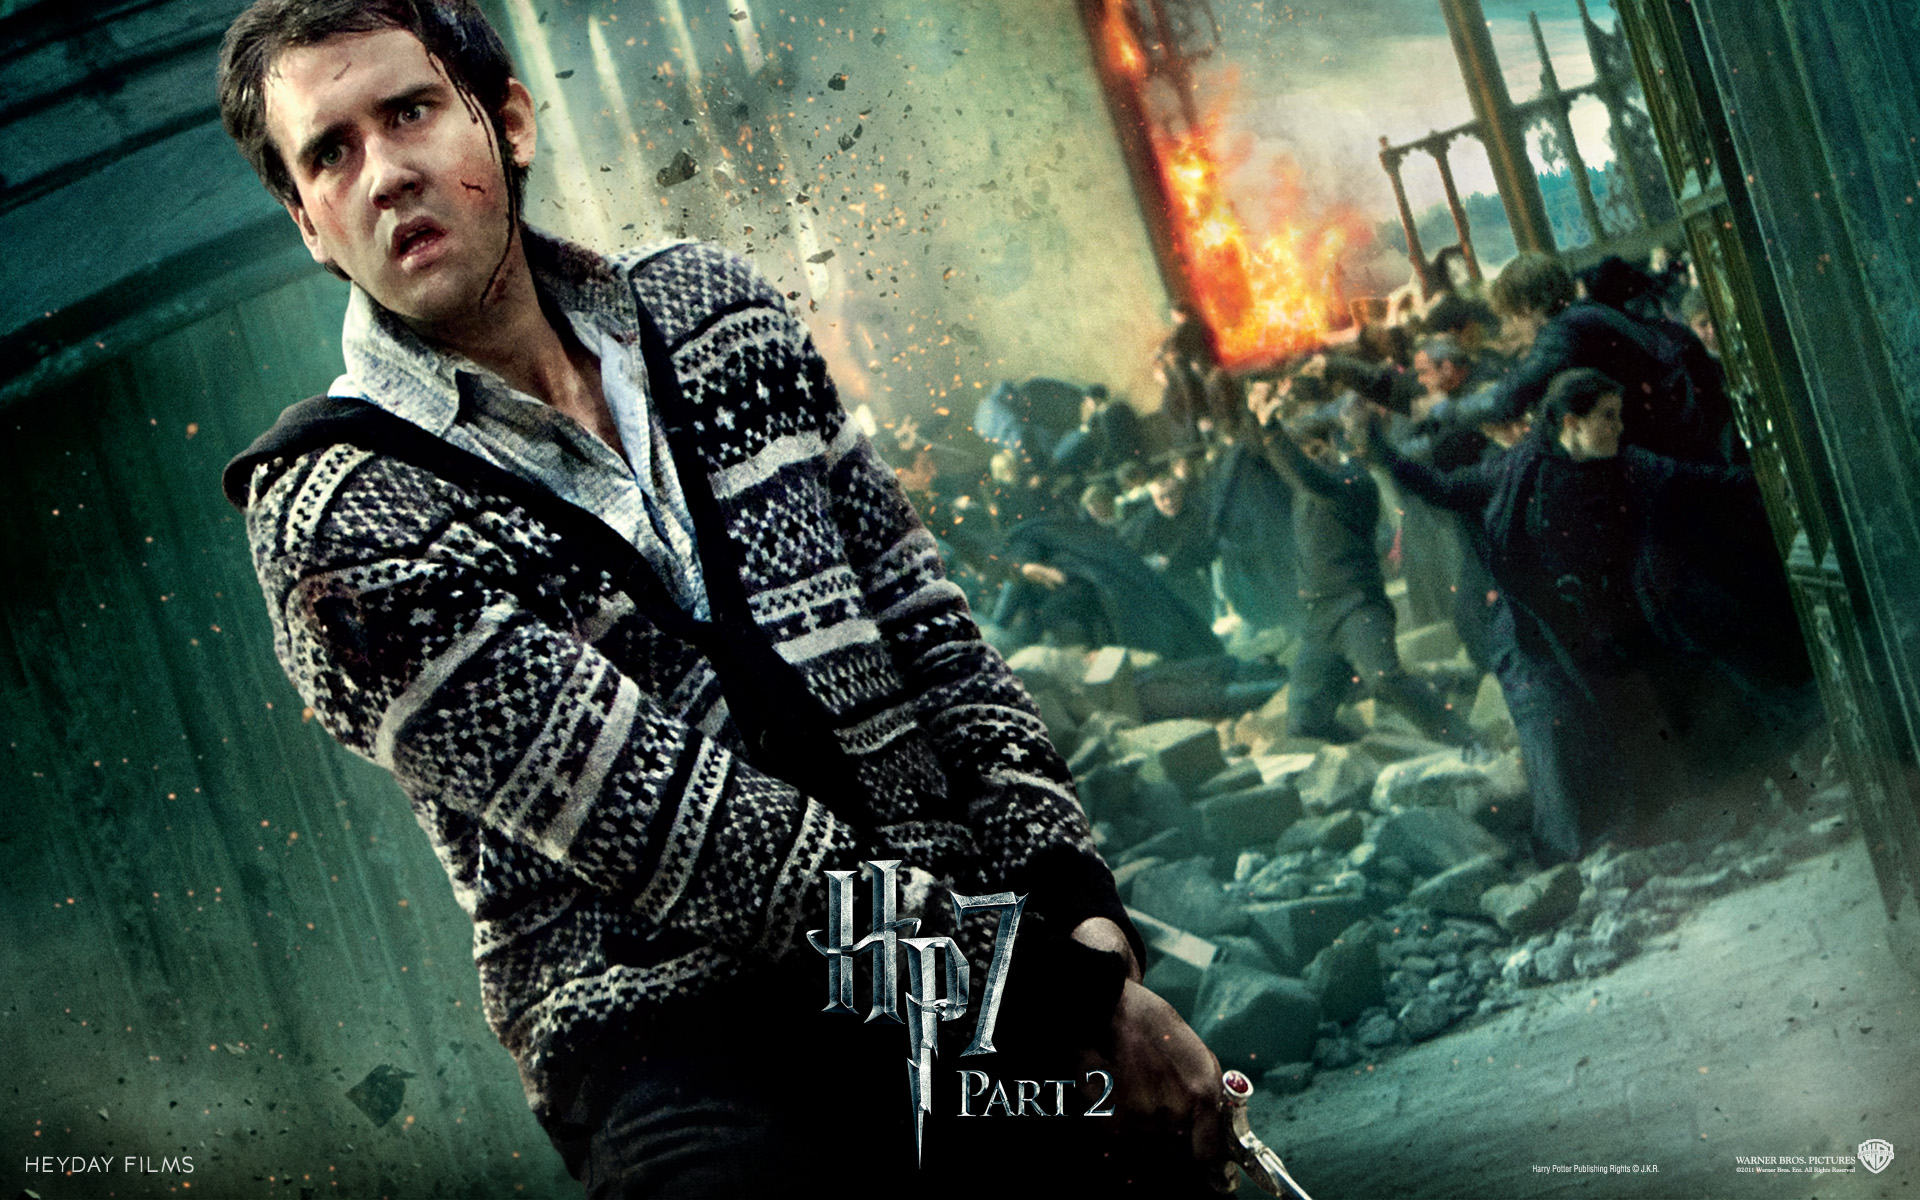 Harry Potter and the Deathly Hallows High Quality Wallpaper Neville